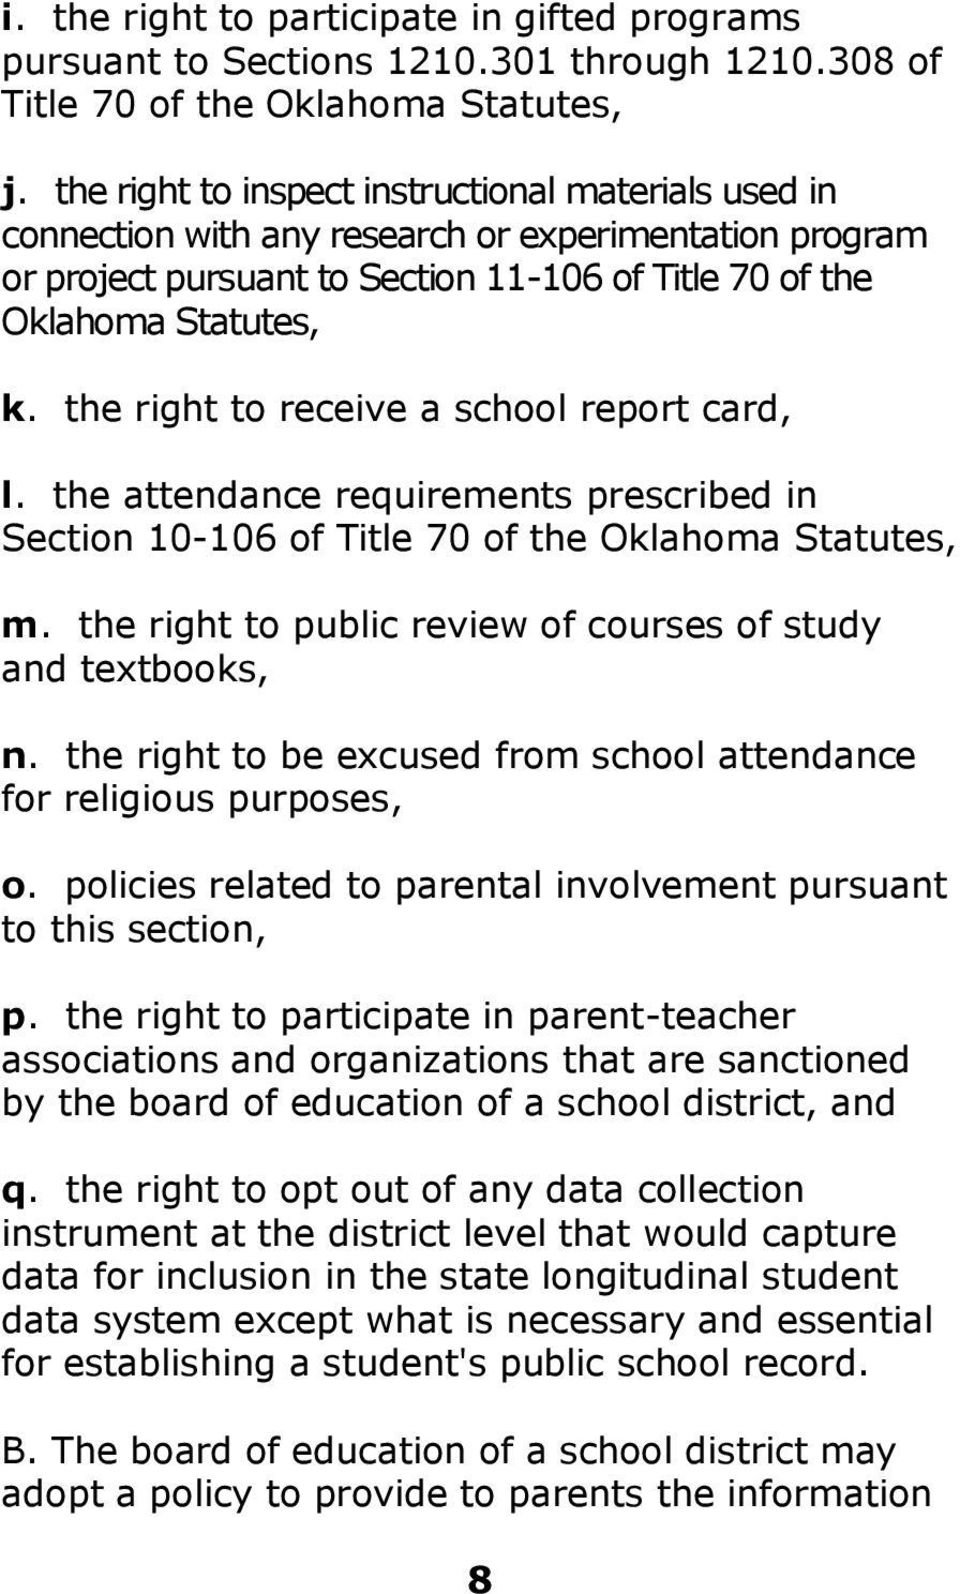 the right to receive a school report card, l. the attendance requirements prescribed in Section 10-106 of Title 70 of the Oklahoma Statutes, m.